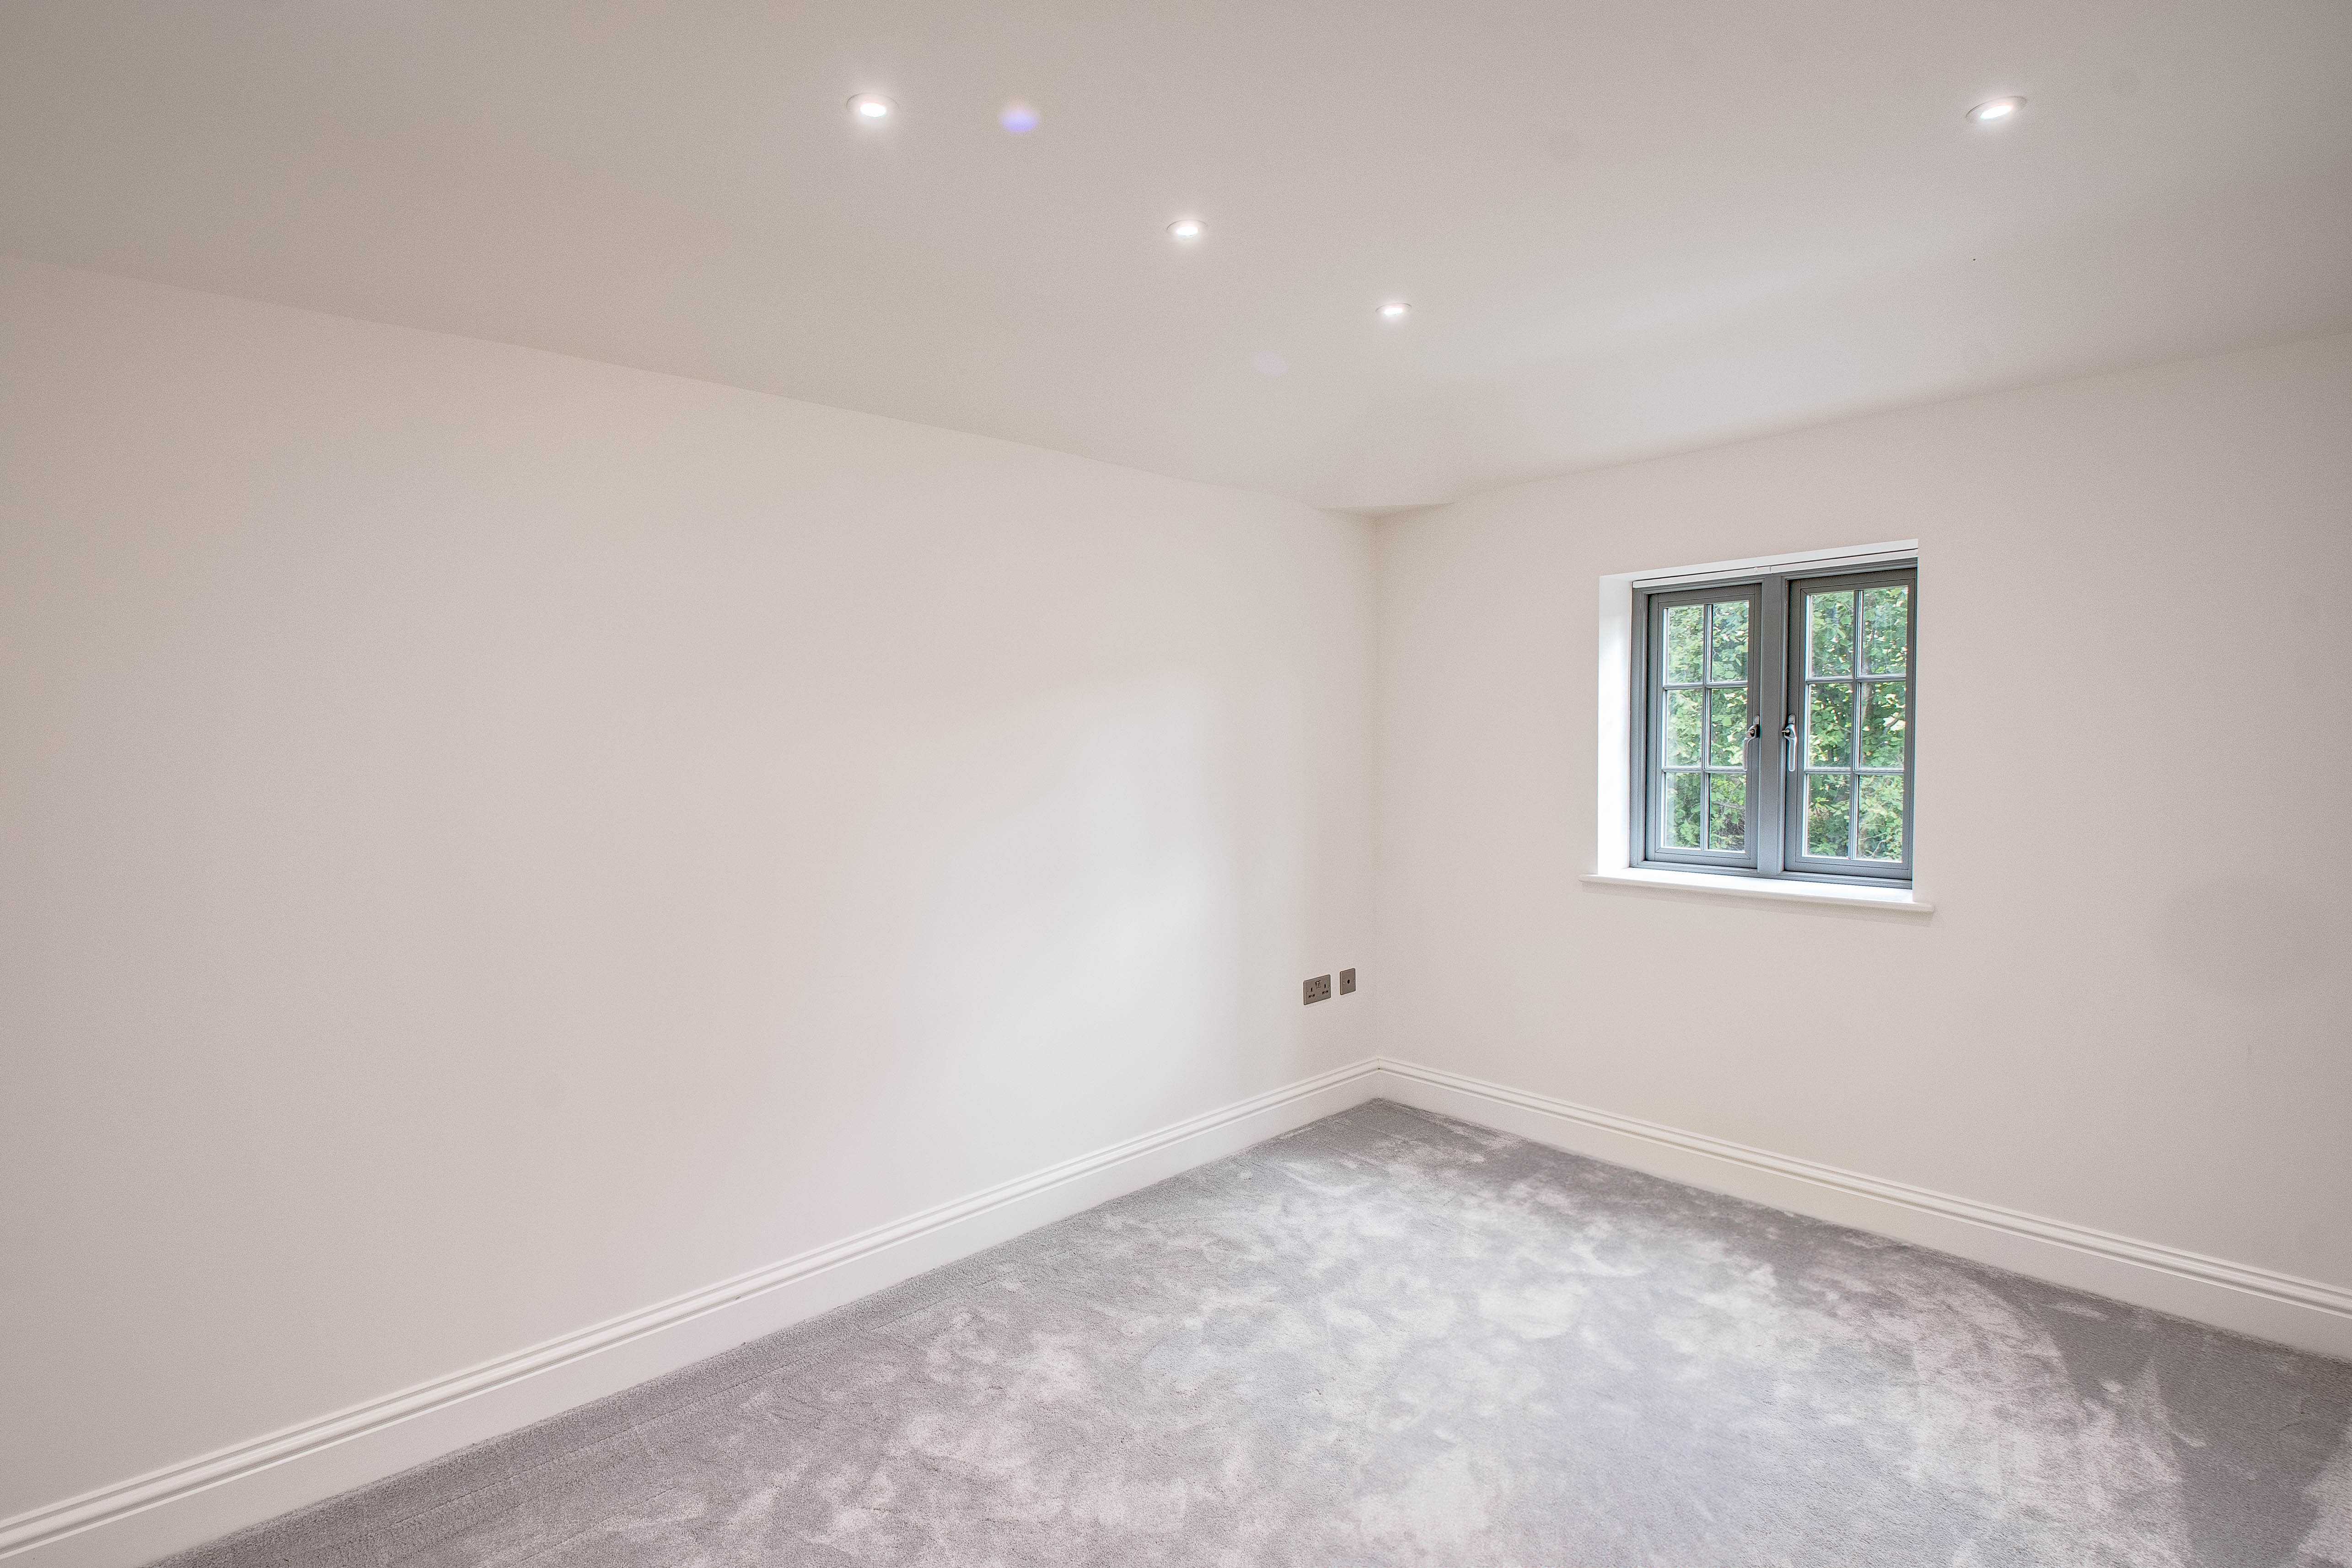 3 bed  for sale in Chadwich Grange, Bromsgrove  - Property Image 10